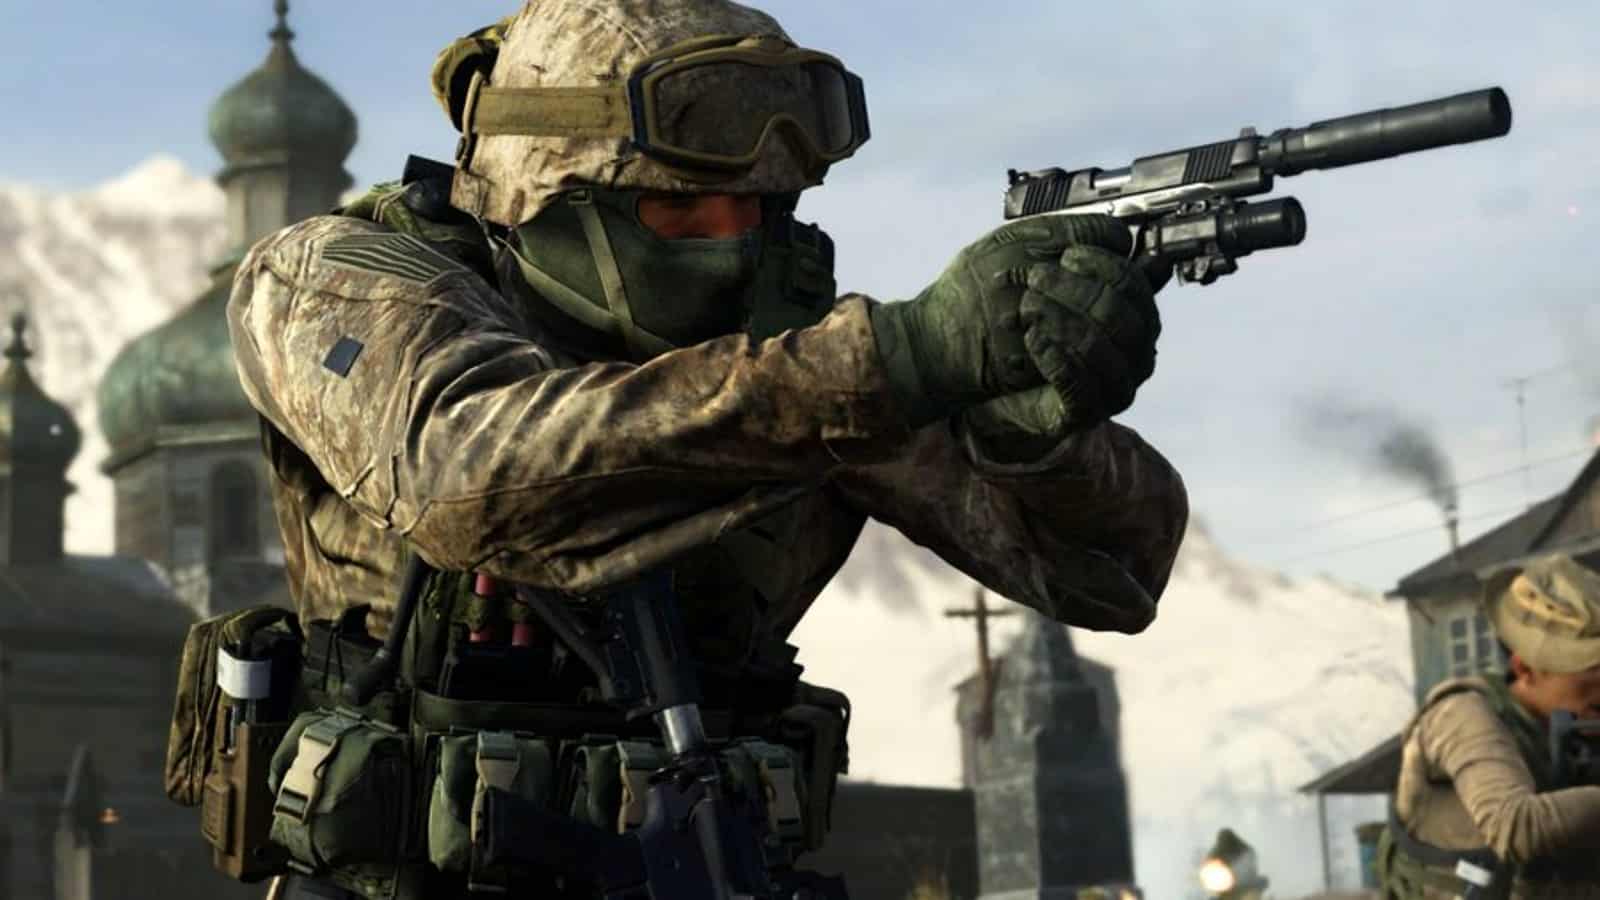 Call of Duty 2022 will reportedly bring classic Modern Warfare 2